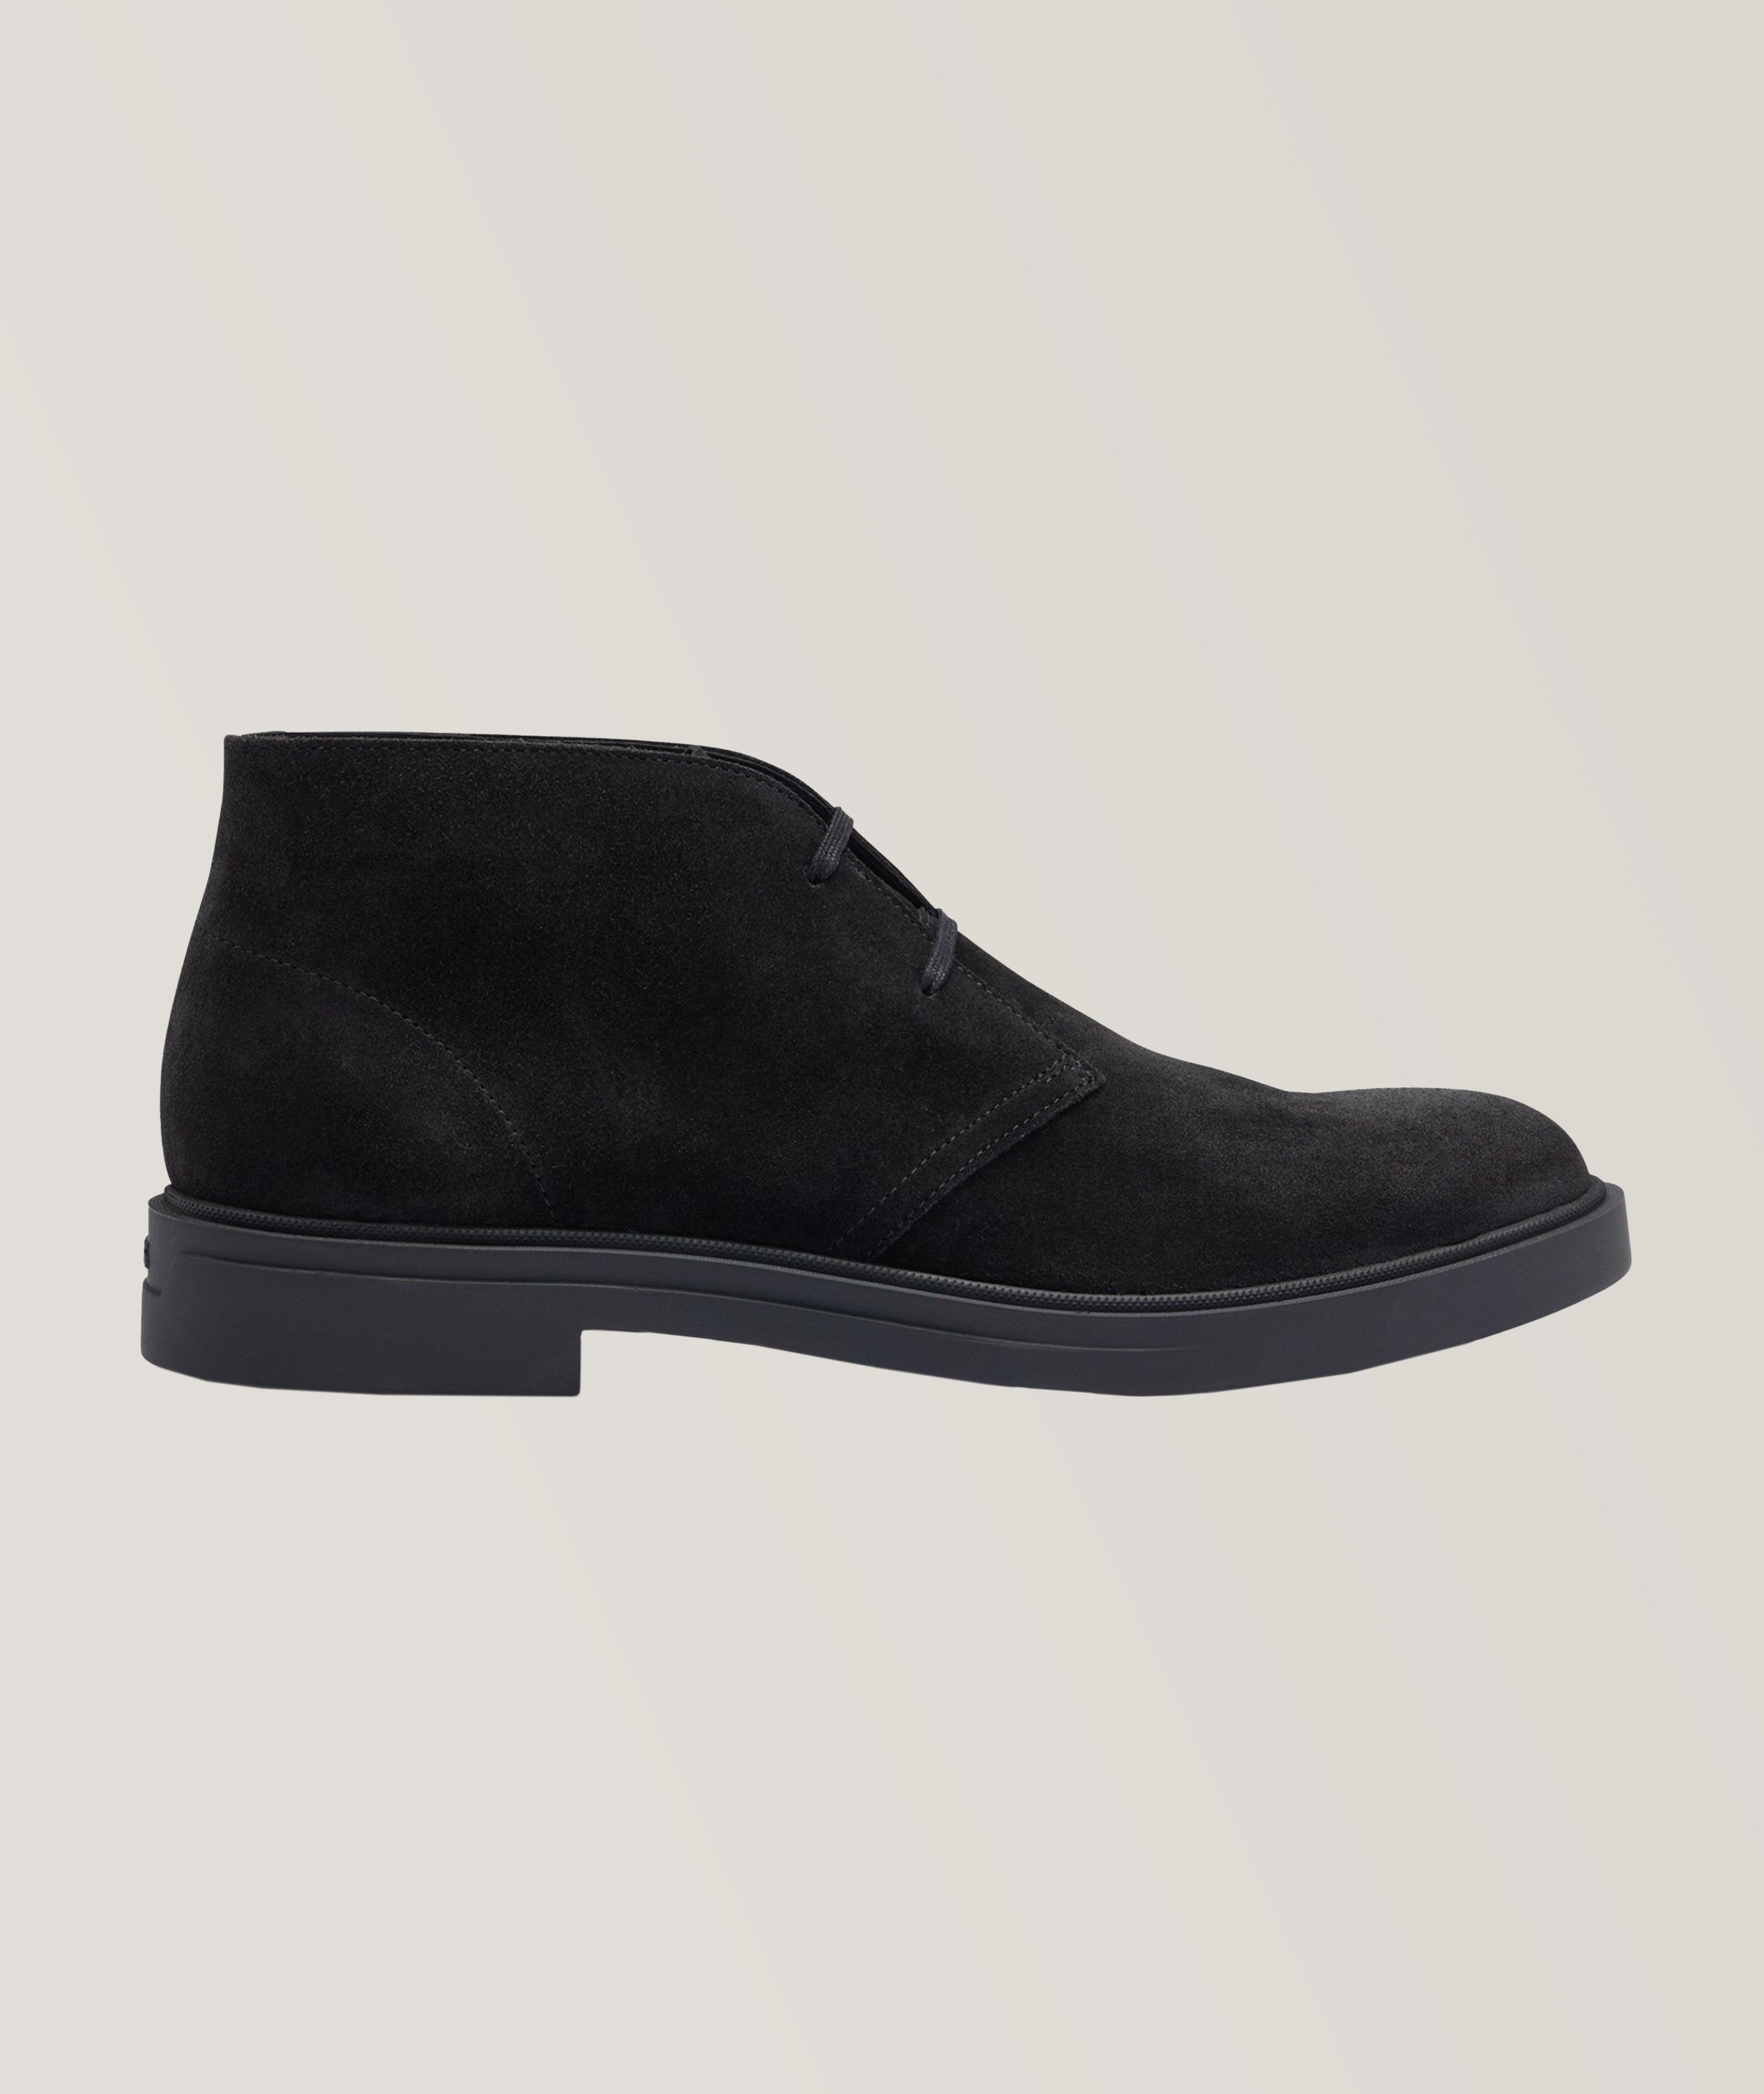 Calev Suede Desert Boots image 0